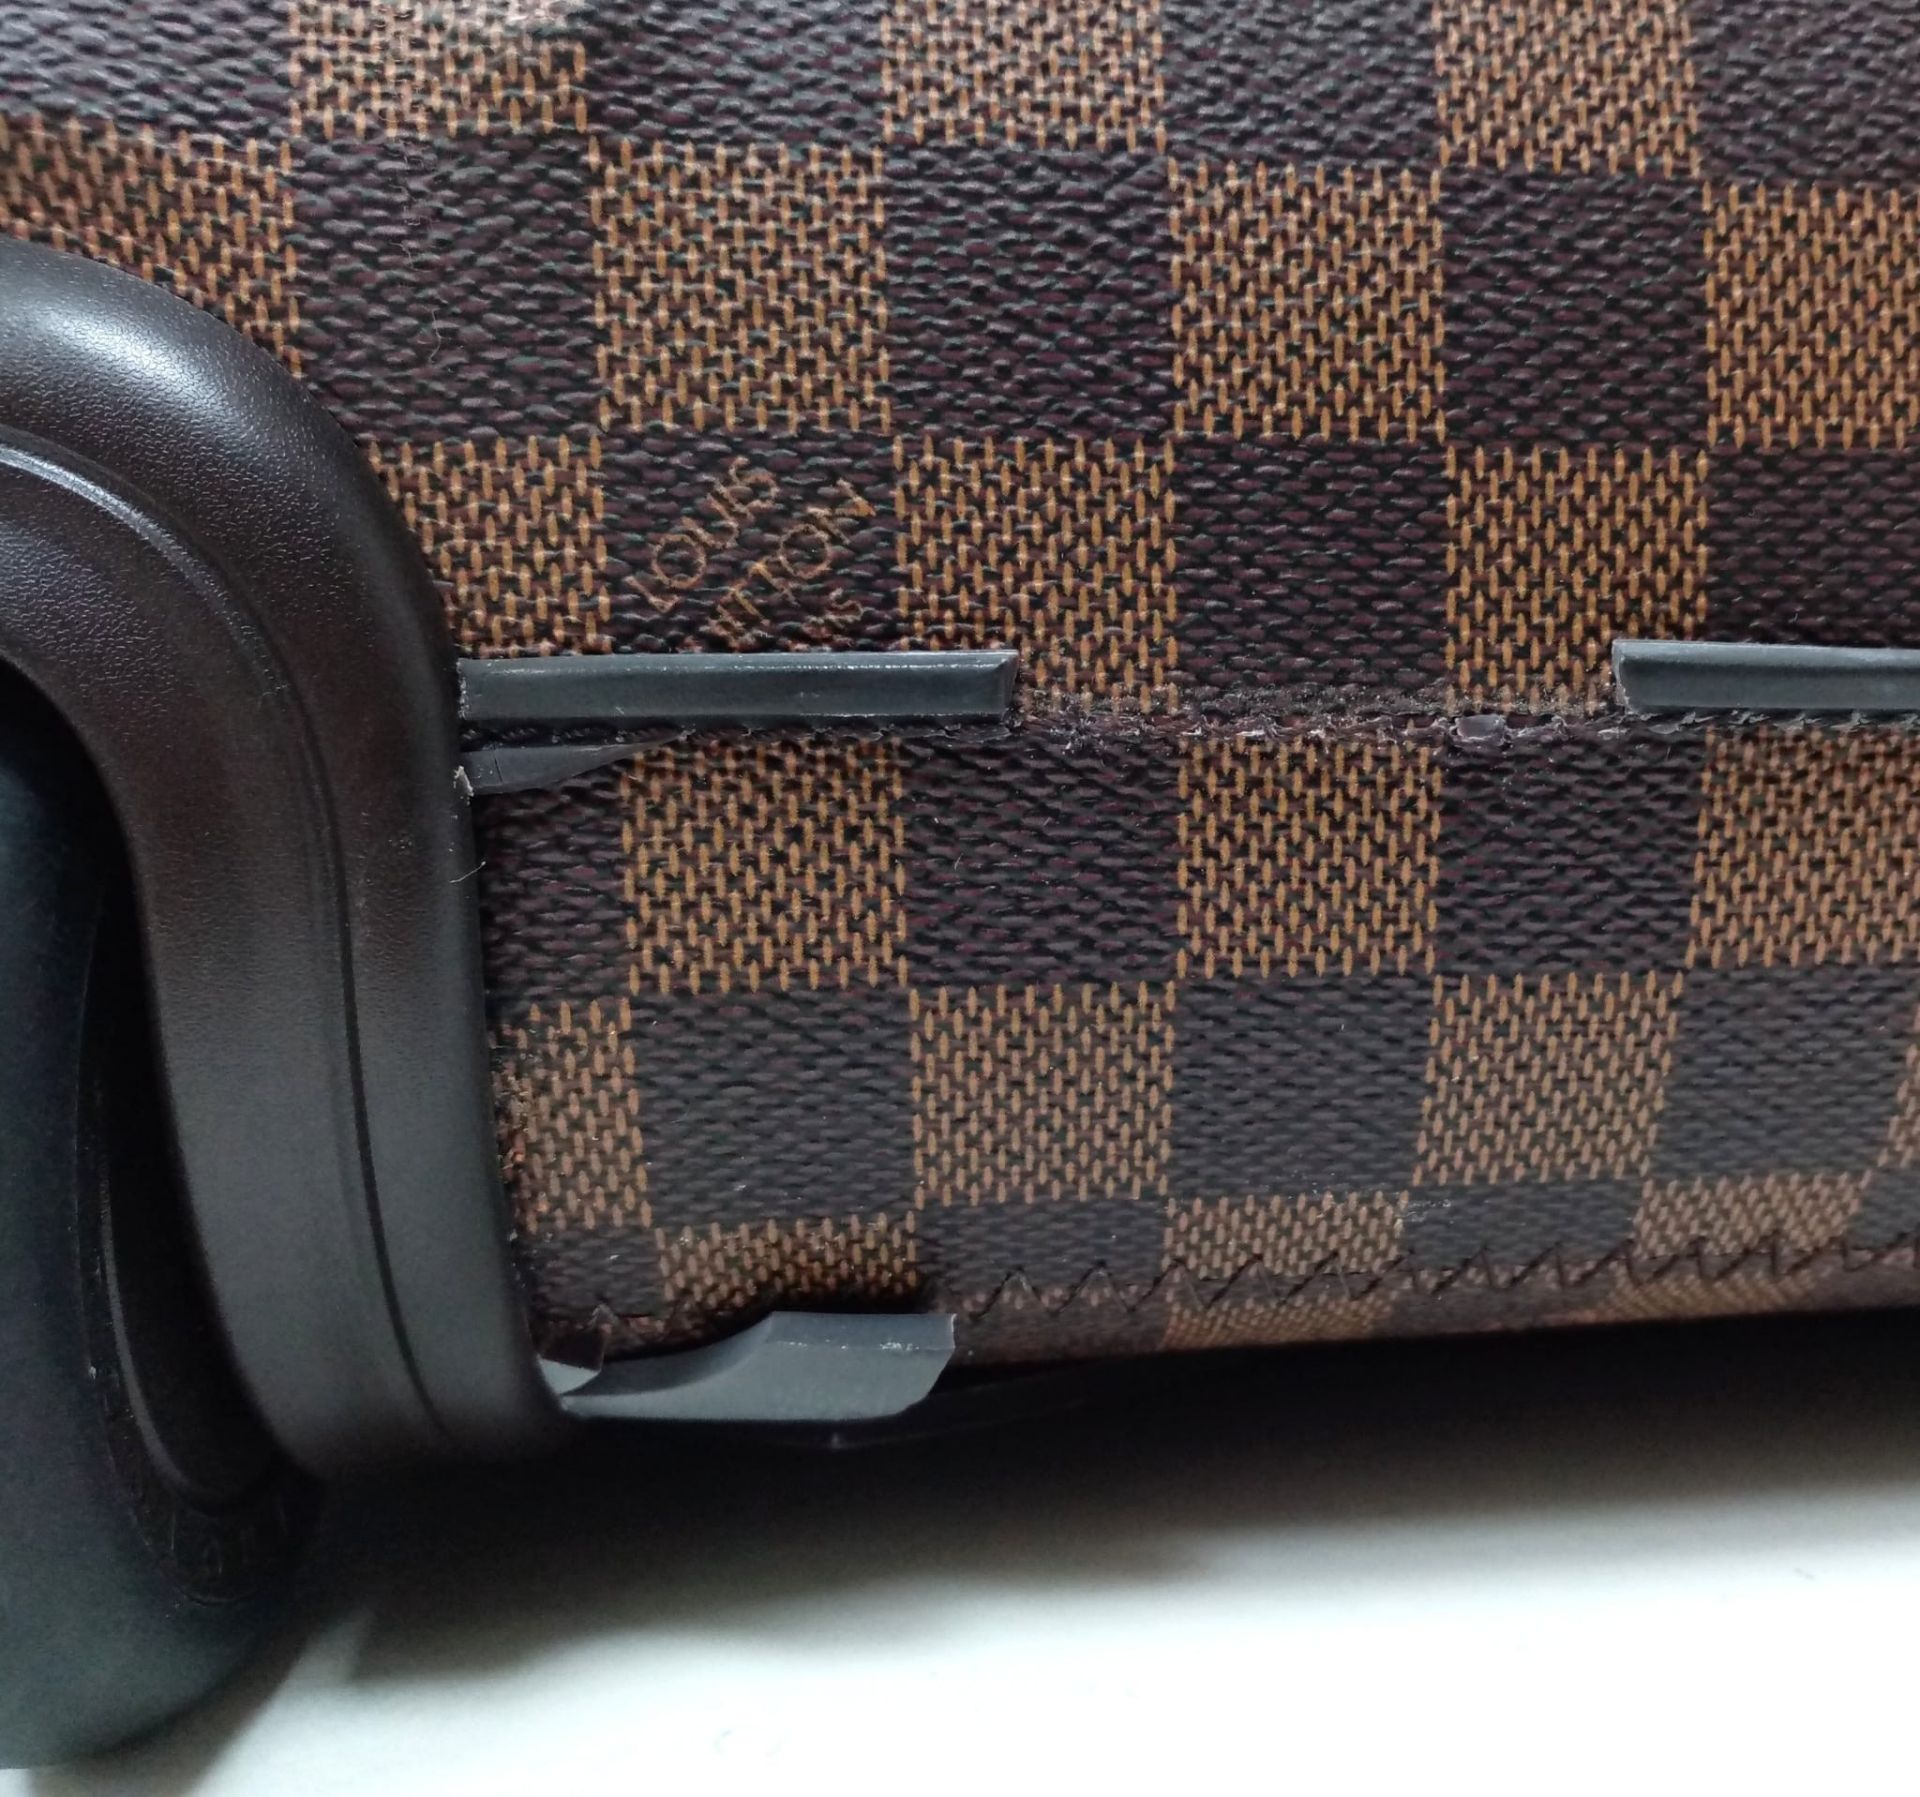 A Louis Vuitton Damier Ebene Eole Convertible Travel Bag. Leather exterior with gold-toned hardware, - Image 12 of 13